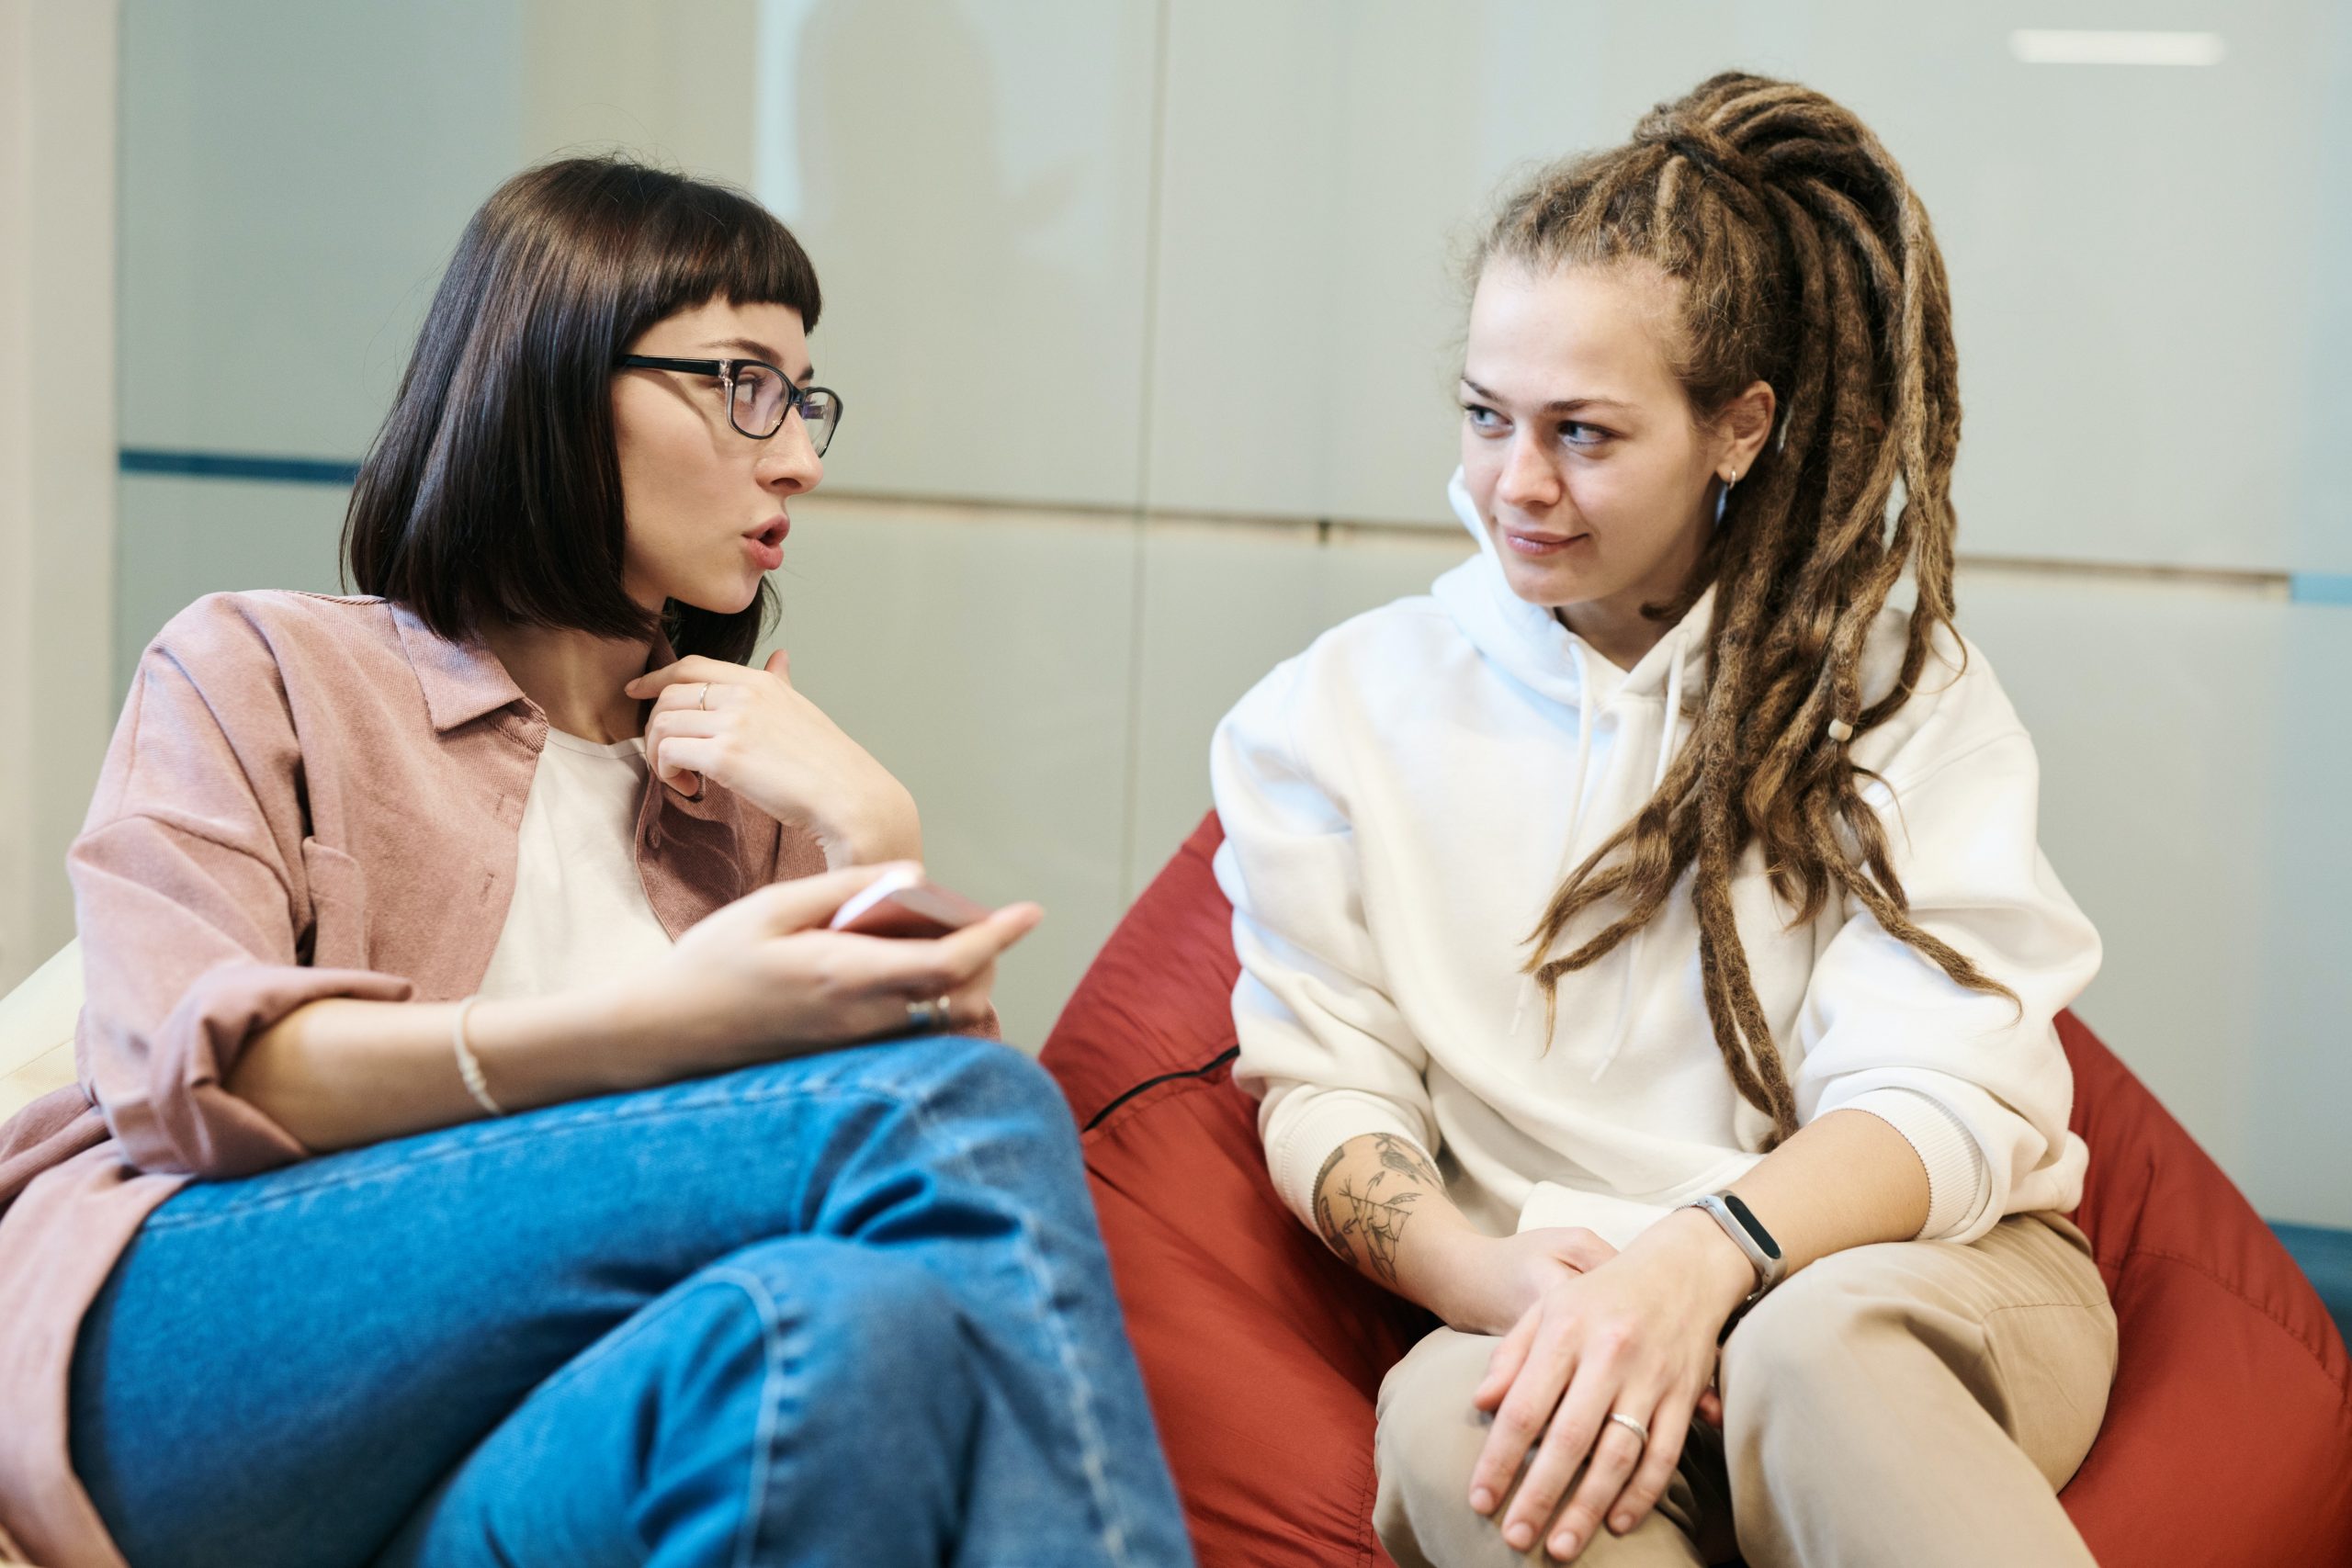 Woman talking to young person